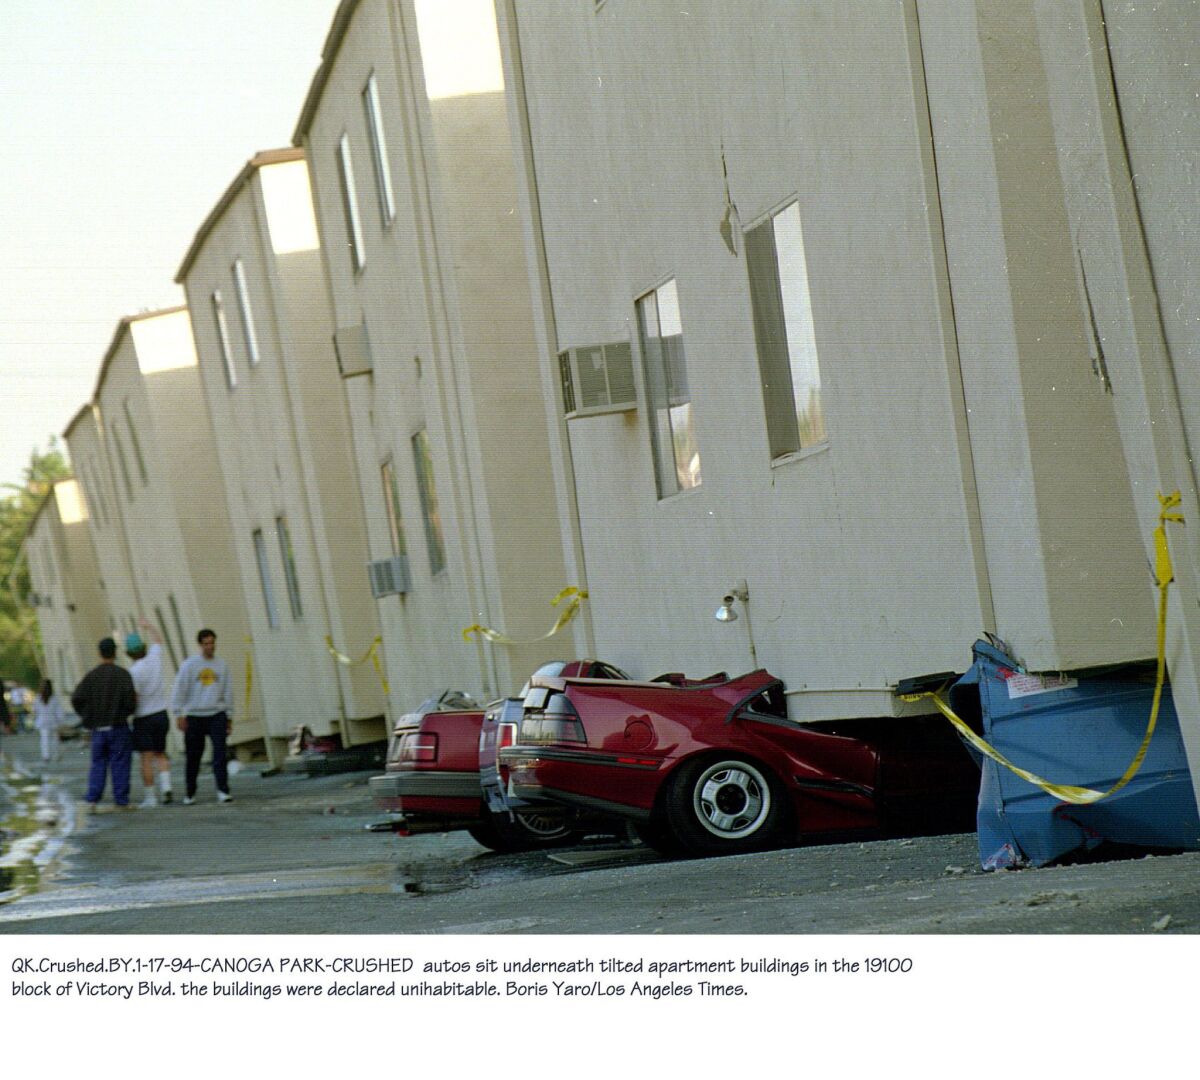 Buildings like this Canoga Park apartment complex, which collapsed in the 1994 Northridge quake, are at risk because their slender columns can't support them during strong shaking.